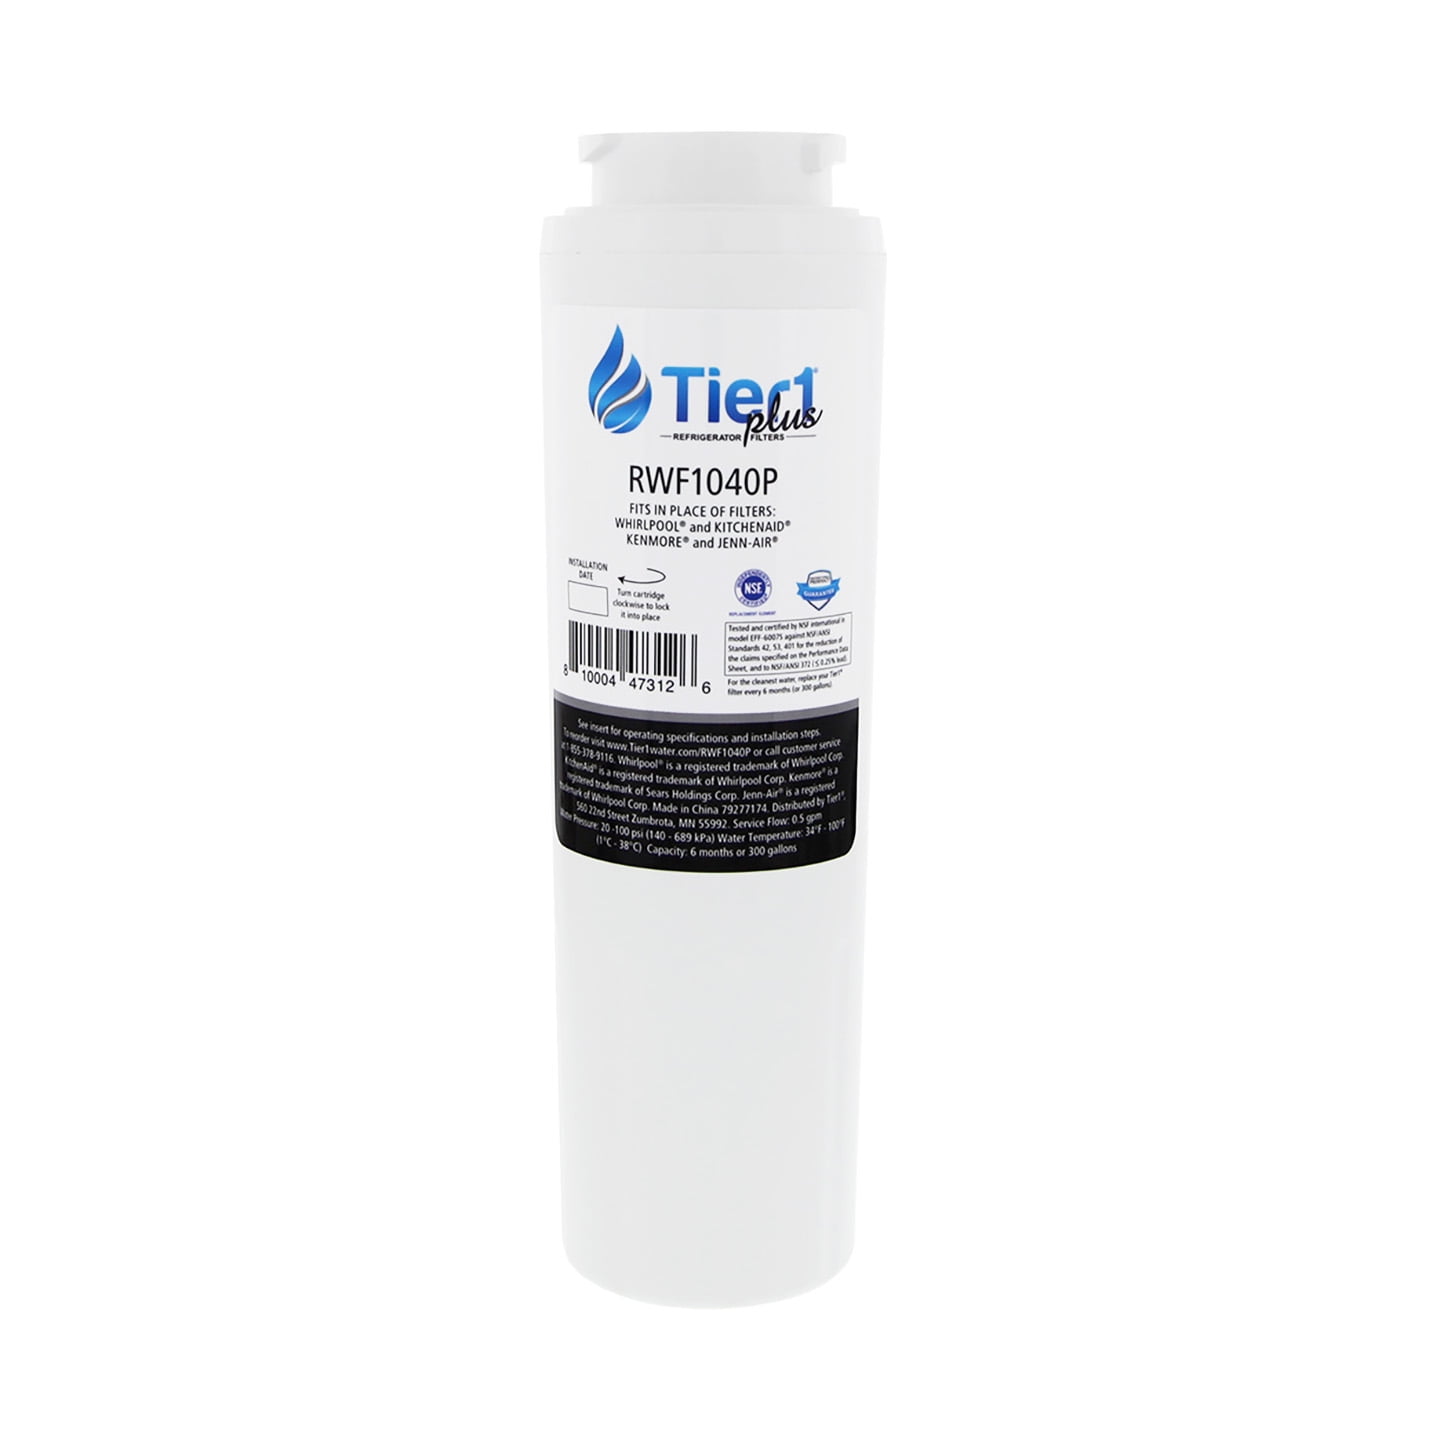 Tier1 Plus NSF 53&42 Certified Replacement for EDR5RXD1 EveryDrop 4396508/4396510 Whirlpool Refrigerator Water Filter - Reduces 99% Lead